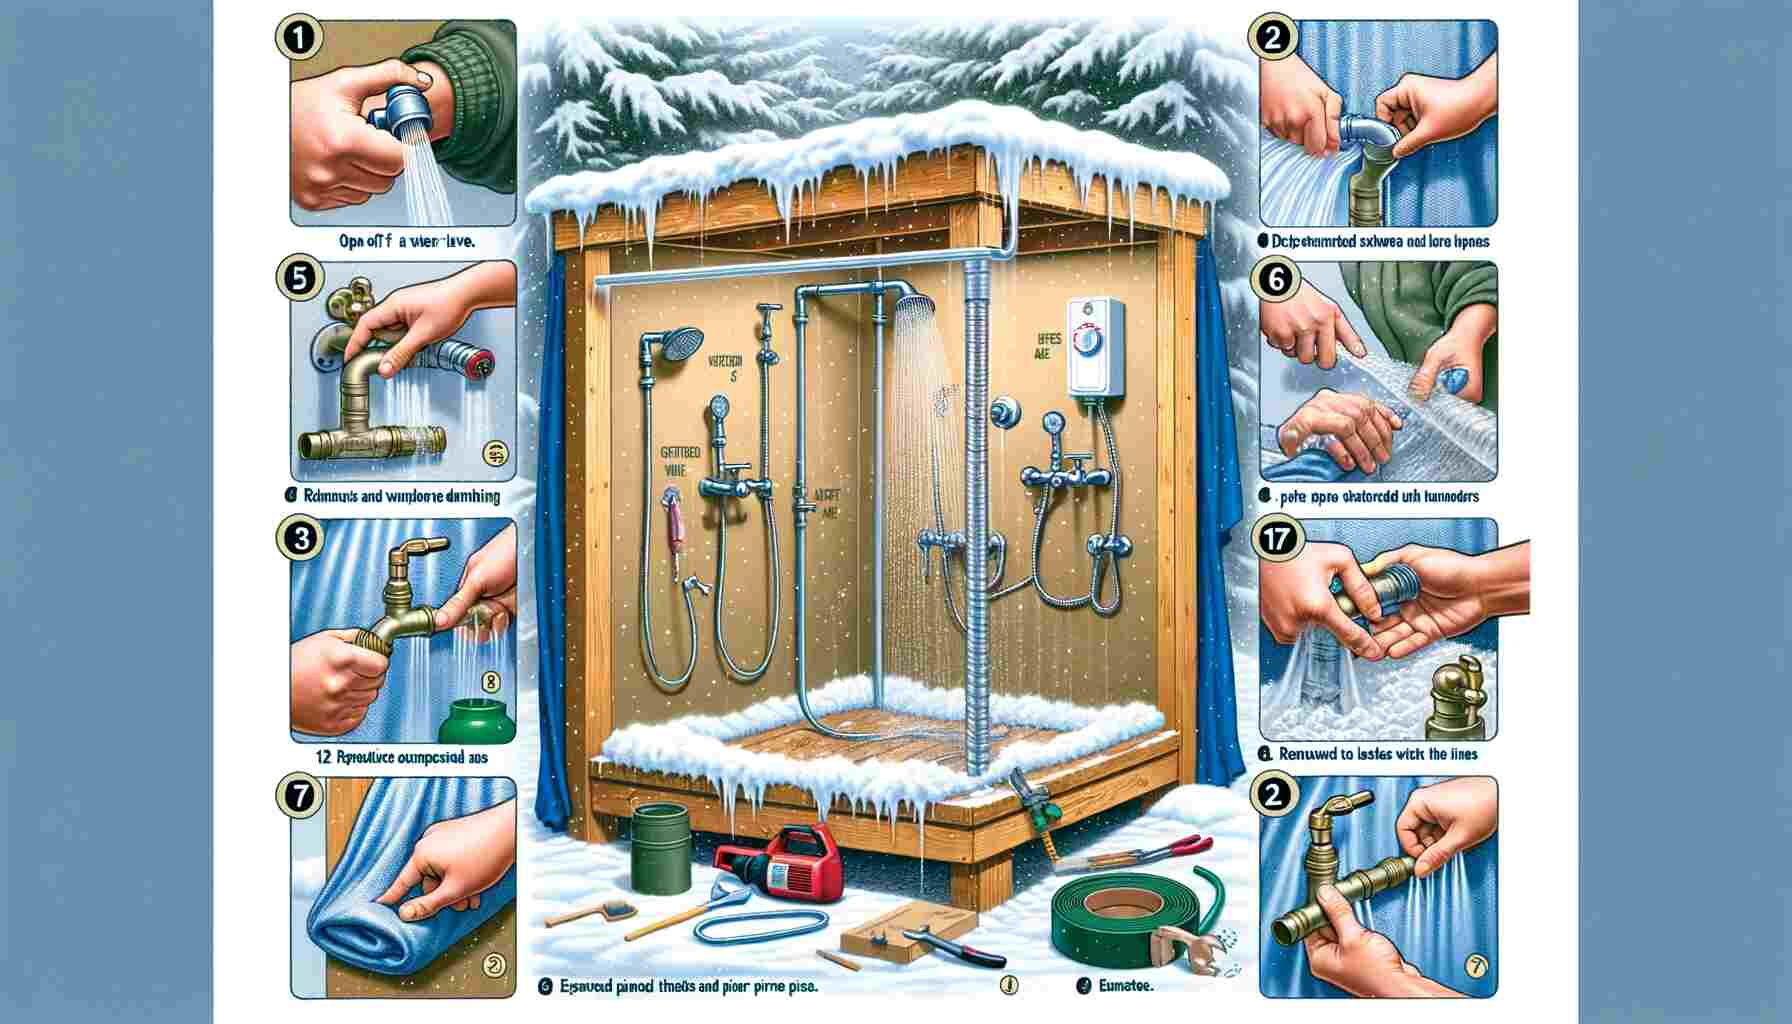 Here is an image representing the steps to winterize your outdoor shower. It visually depicts each step of the process in a clear and sequential manner.